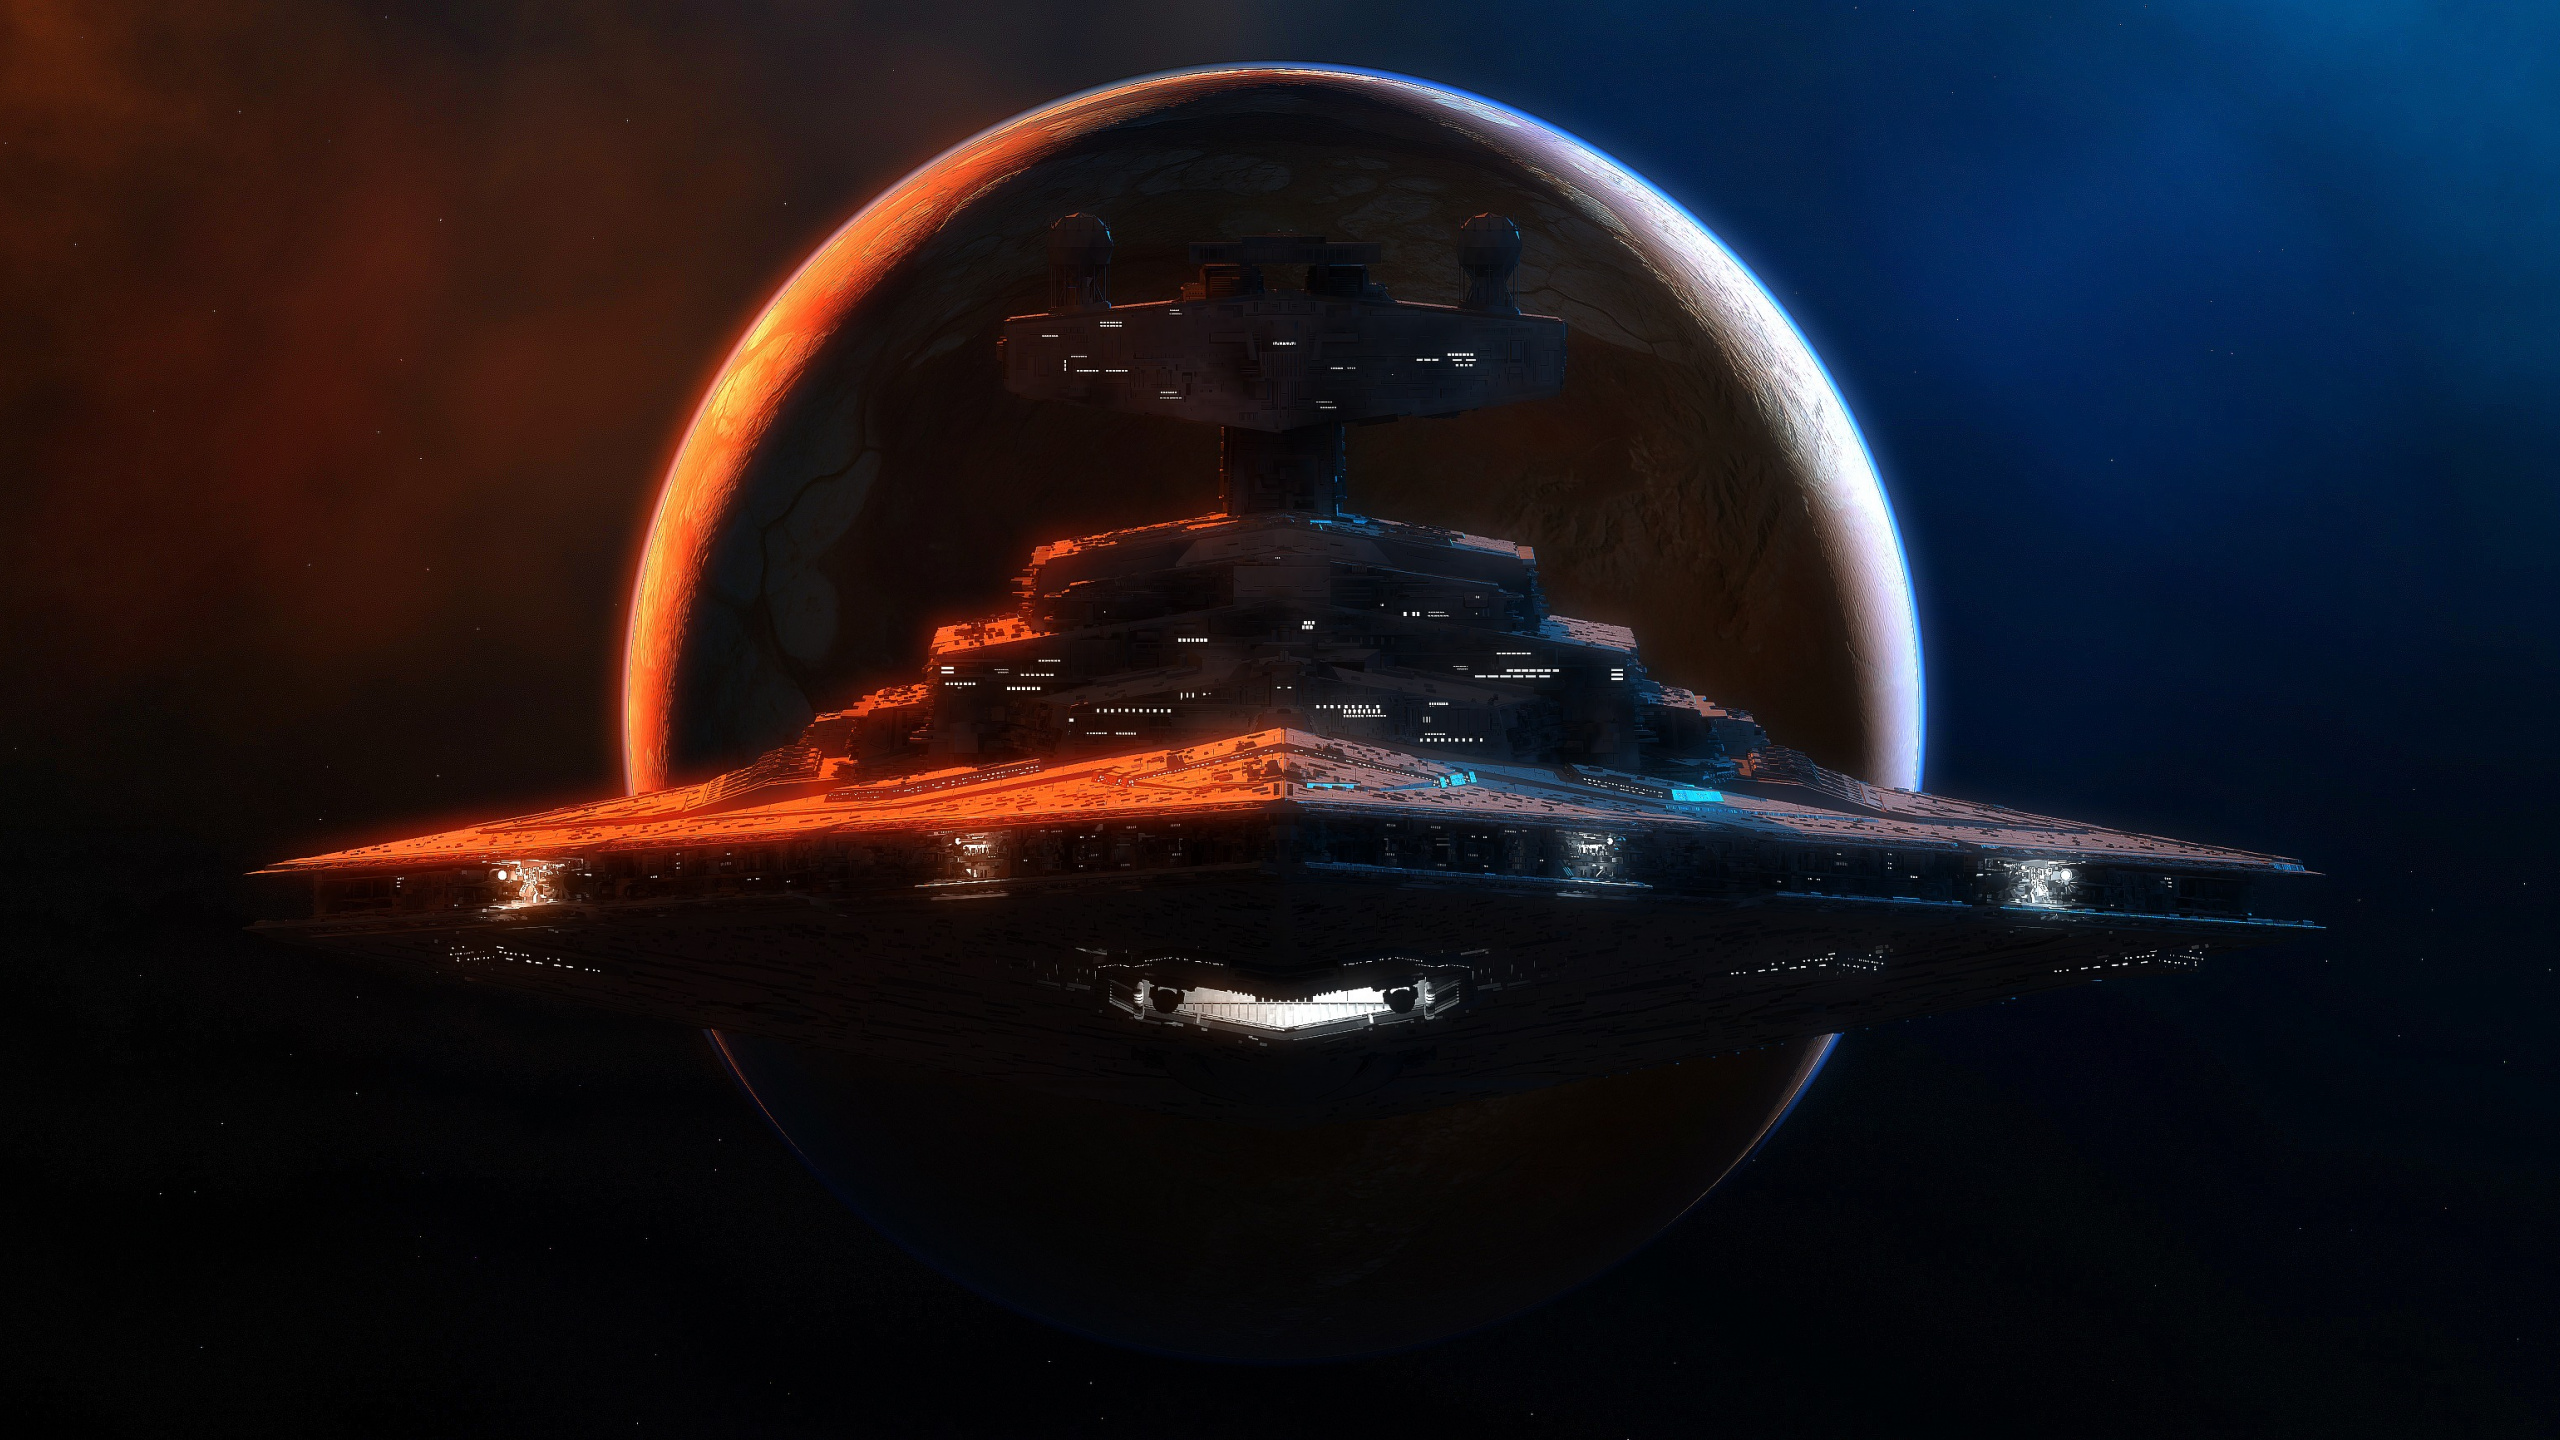 Download Star destroyer, star wars, video game, planet and spacecraft wallpaper, 2560x Dual Wide, Widescreen 16: Widescreen